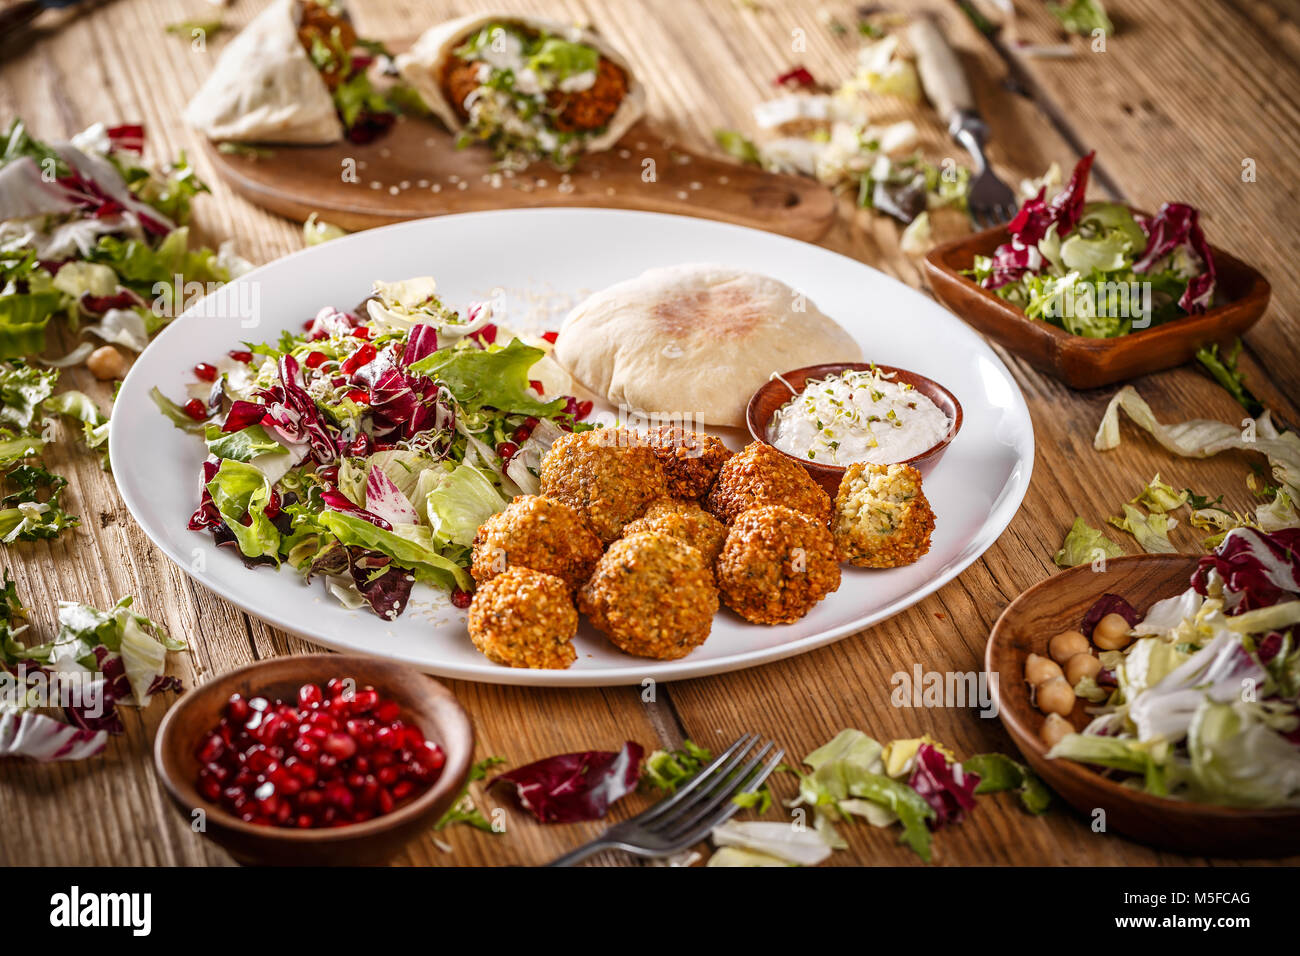 Vegetarian falafels and lettuce in white plate Stock Photo